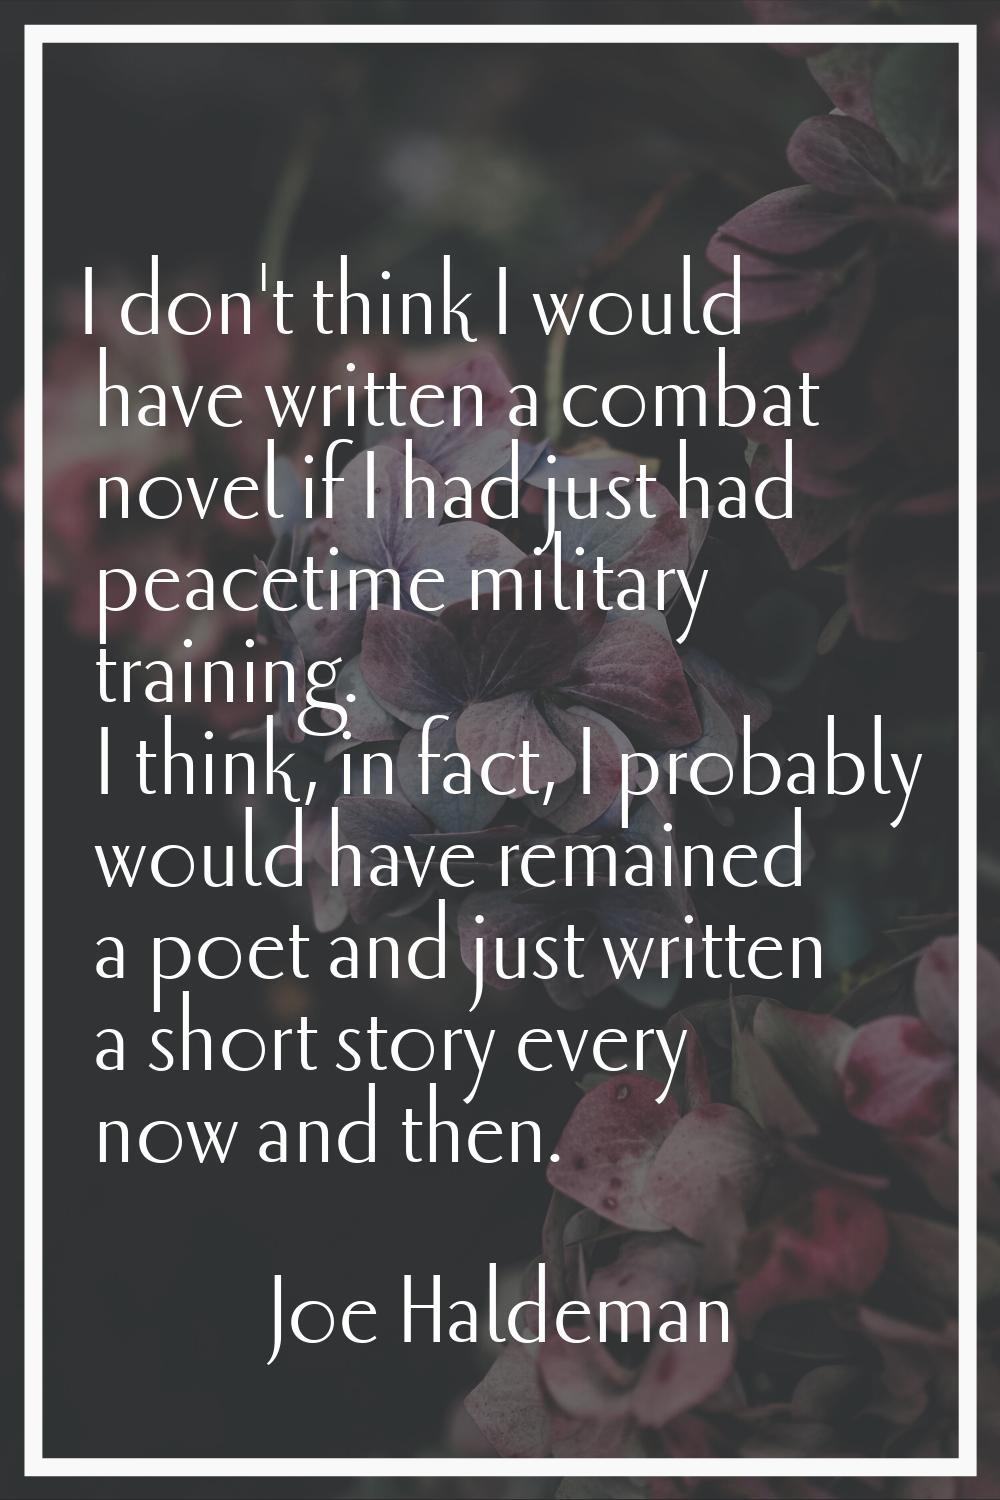 I don't think I would have written a combat novel if I had just had peacetime military training. I 